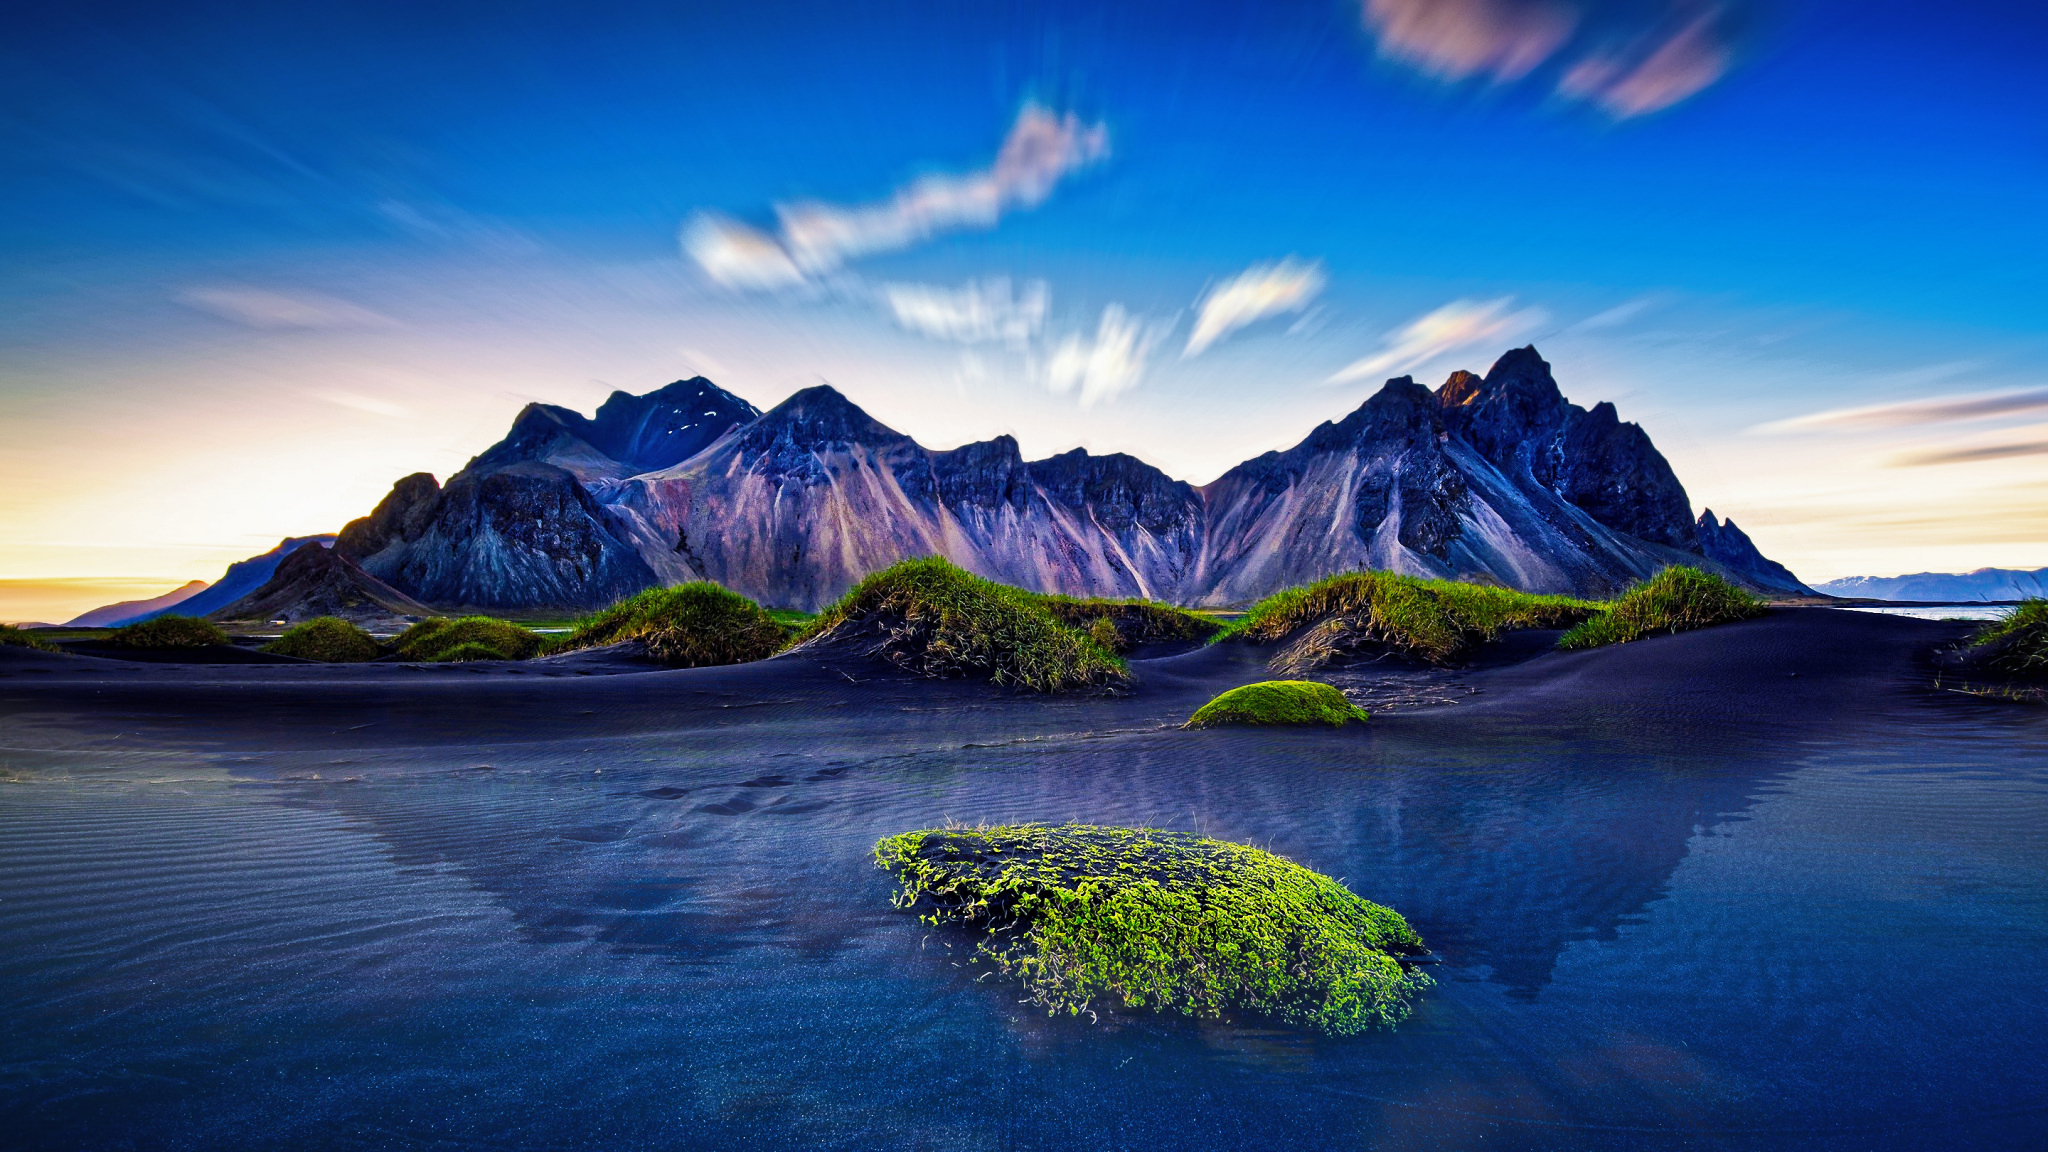 Download 2048x1152 Wallpaper Mountains Iceland Reflections